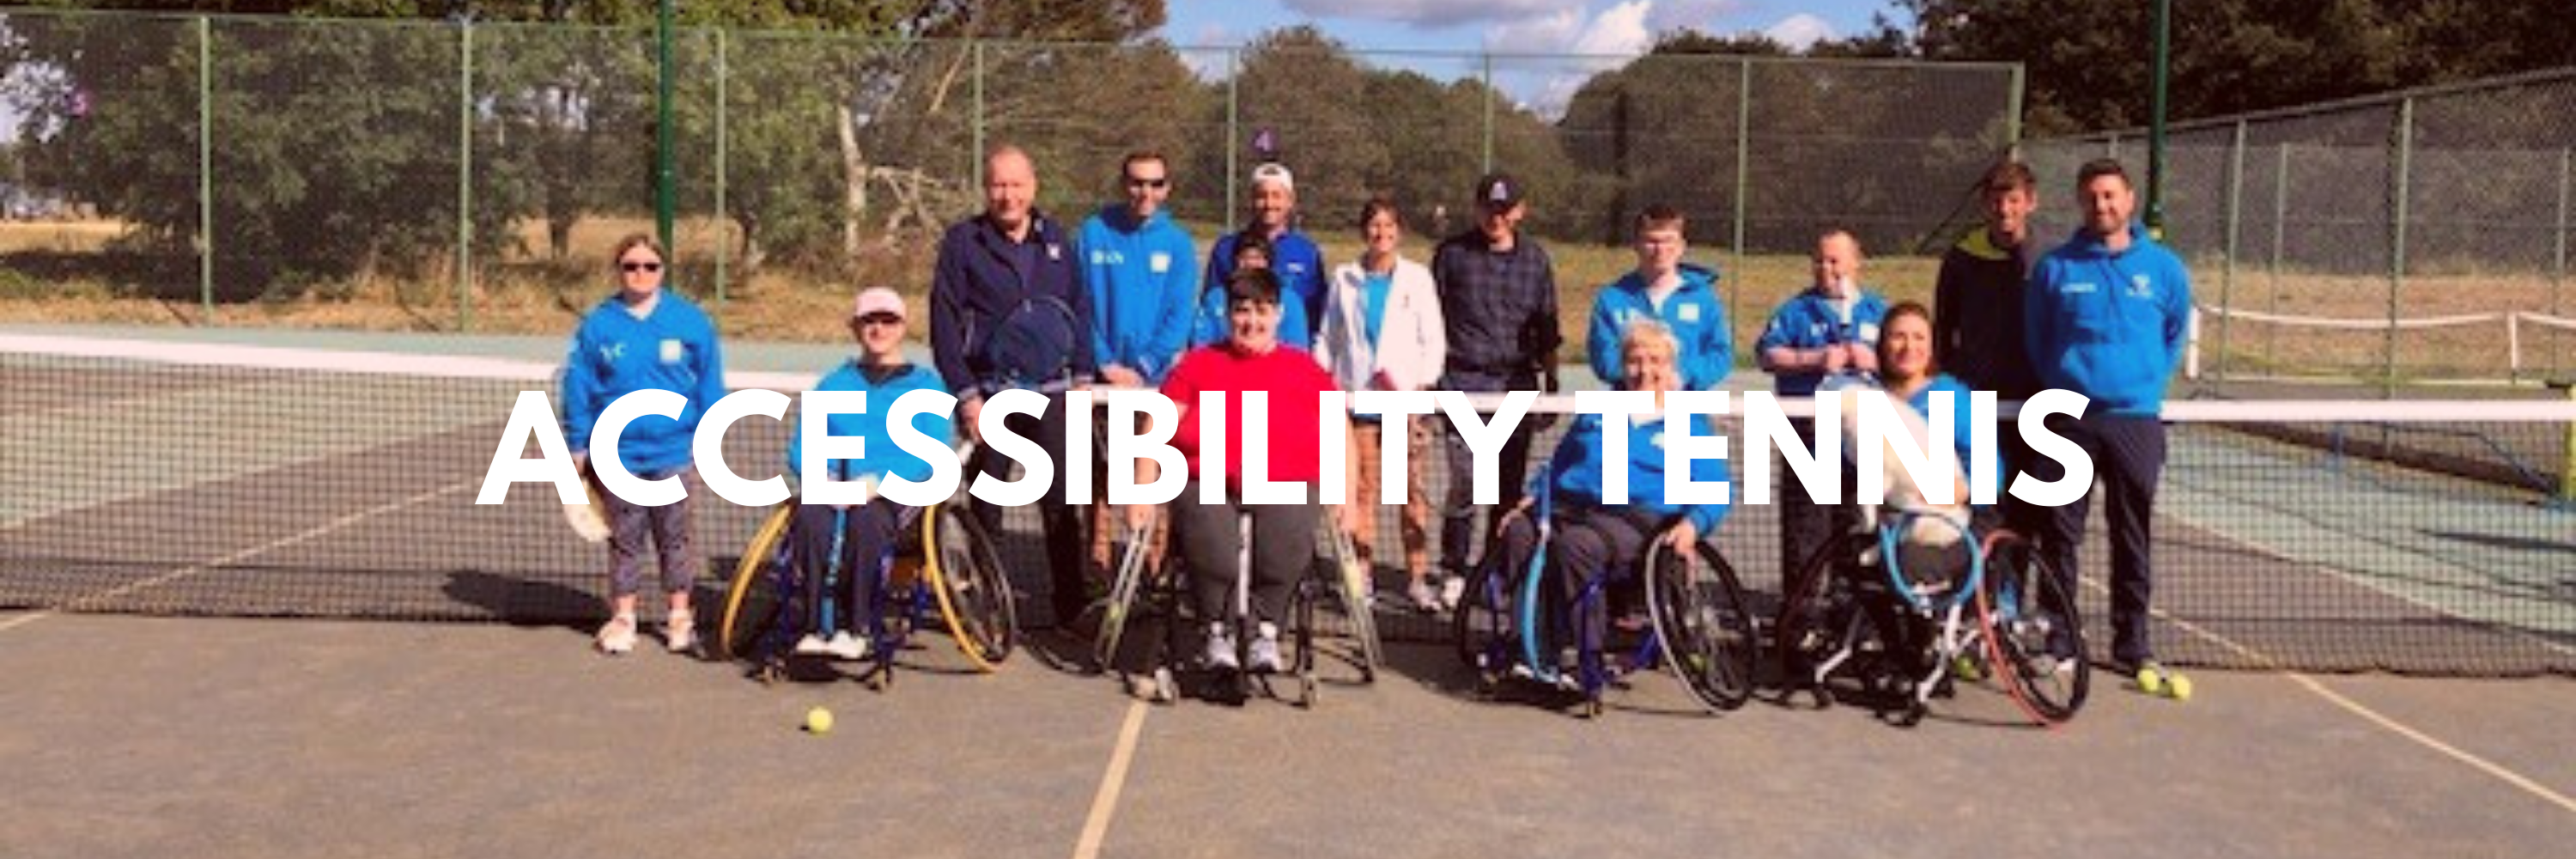 accessibility tennis